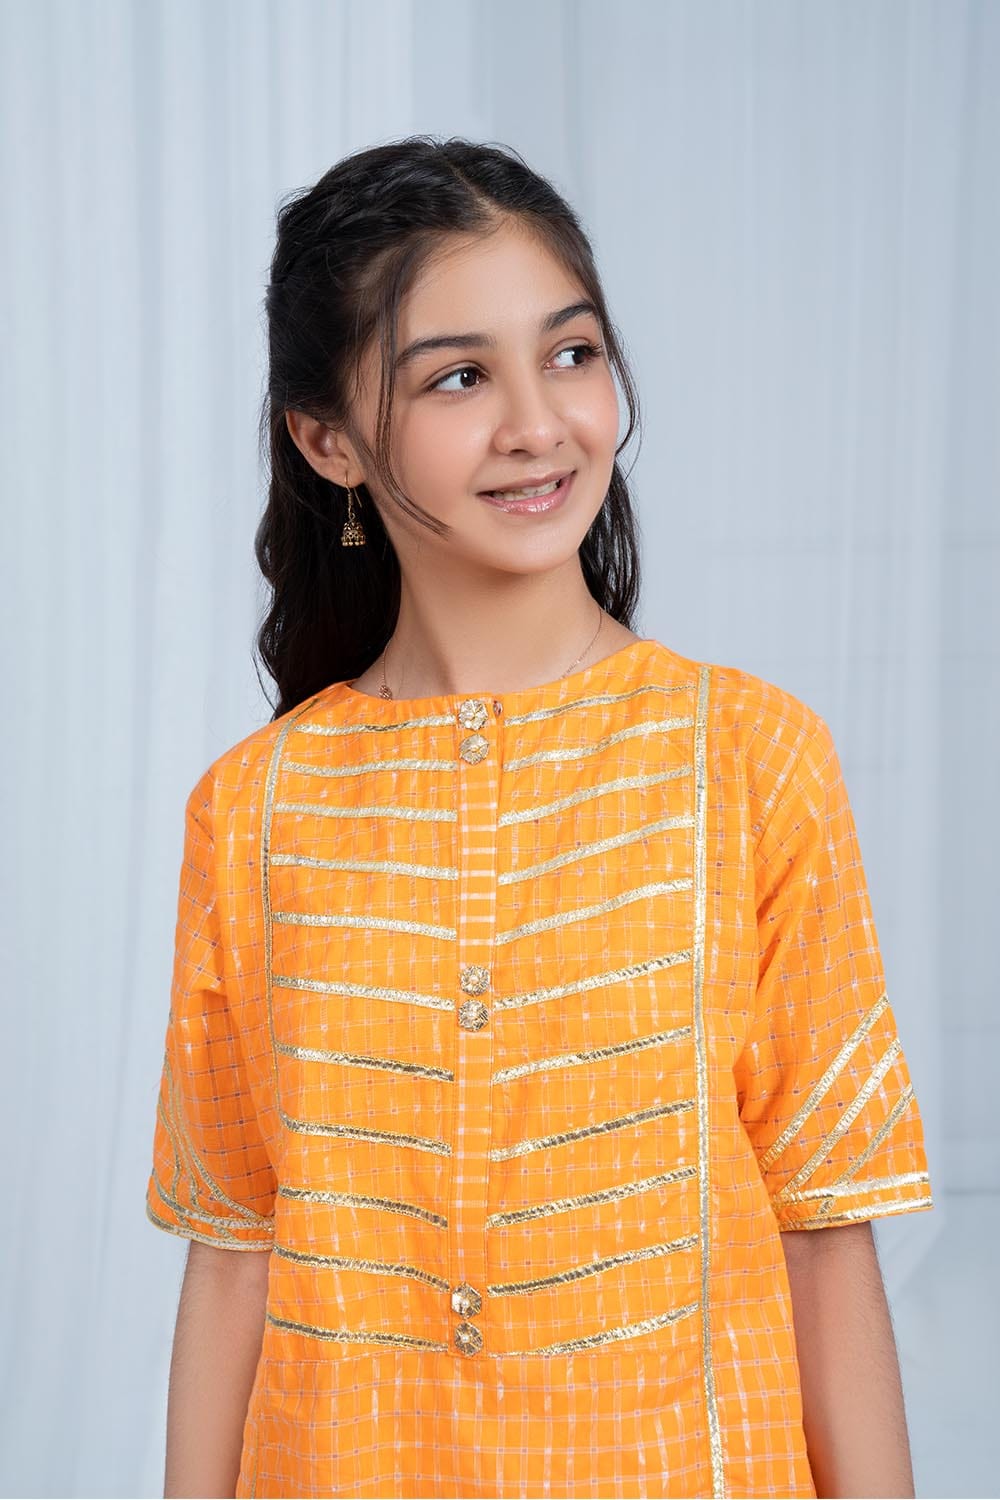 Hope Not Out by Shahid Afridi Eastern Girls Shirts Girl Flora Orange Self Check Shirt